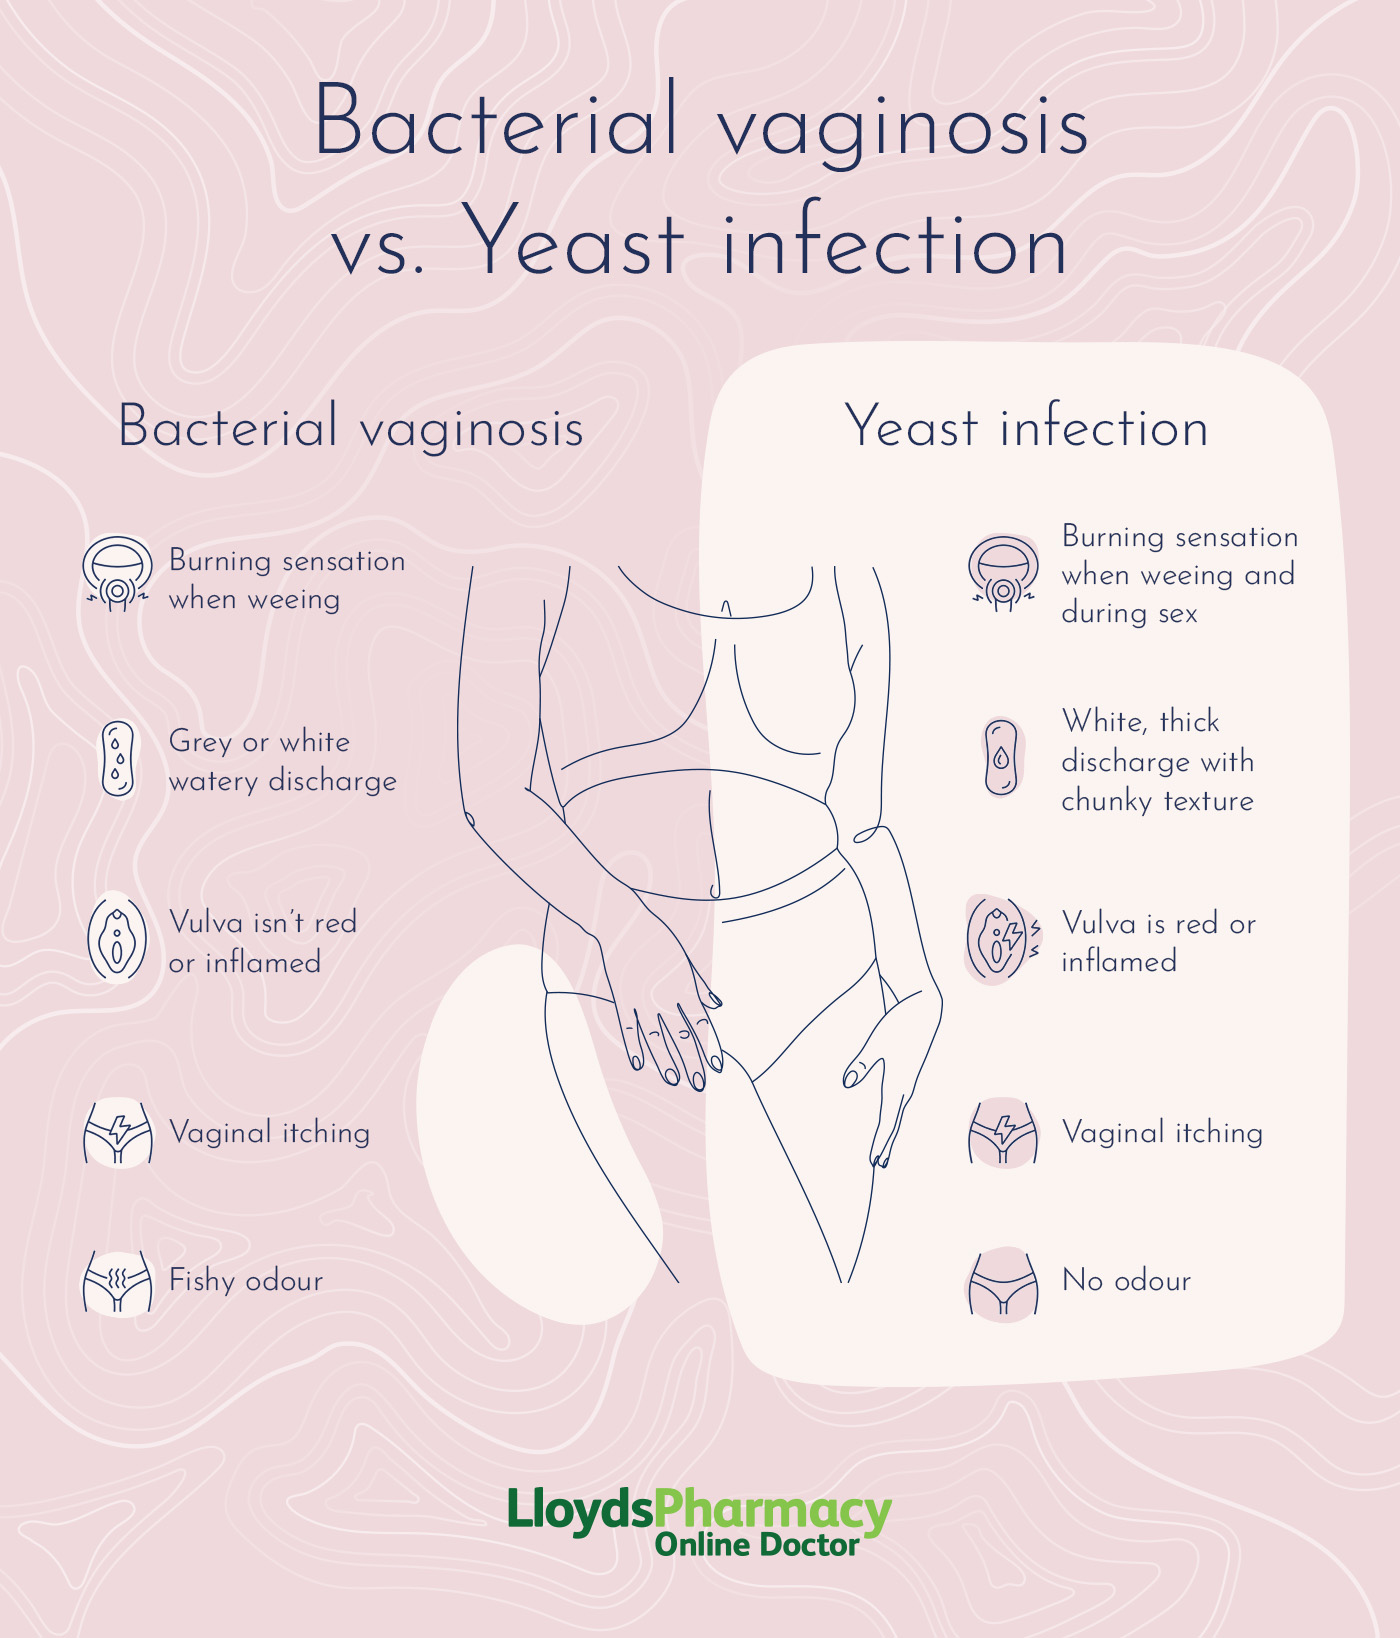 BV vs yeast infection